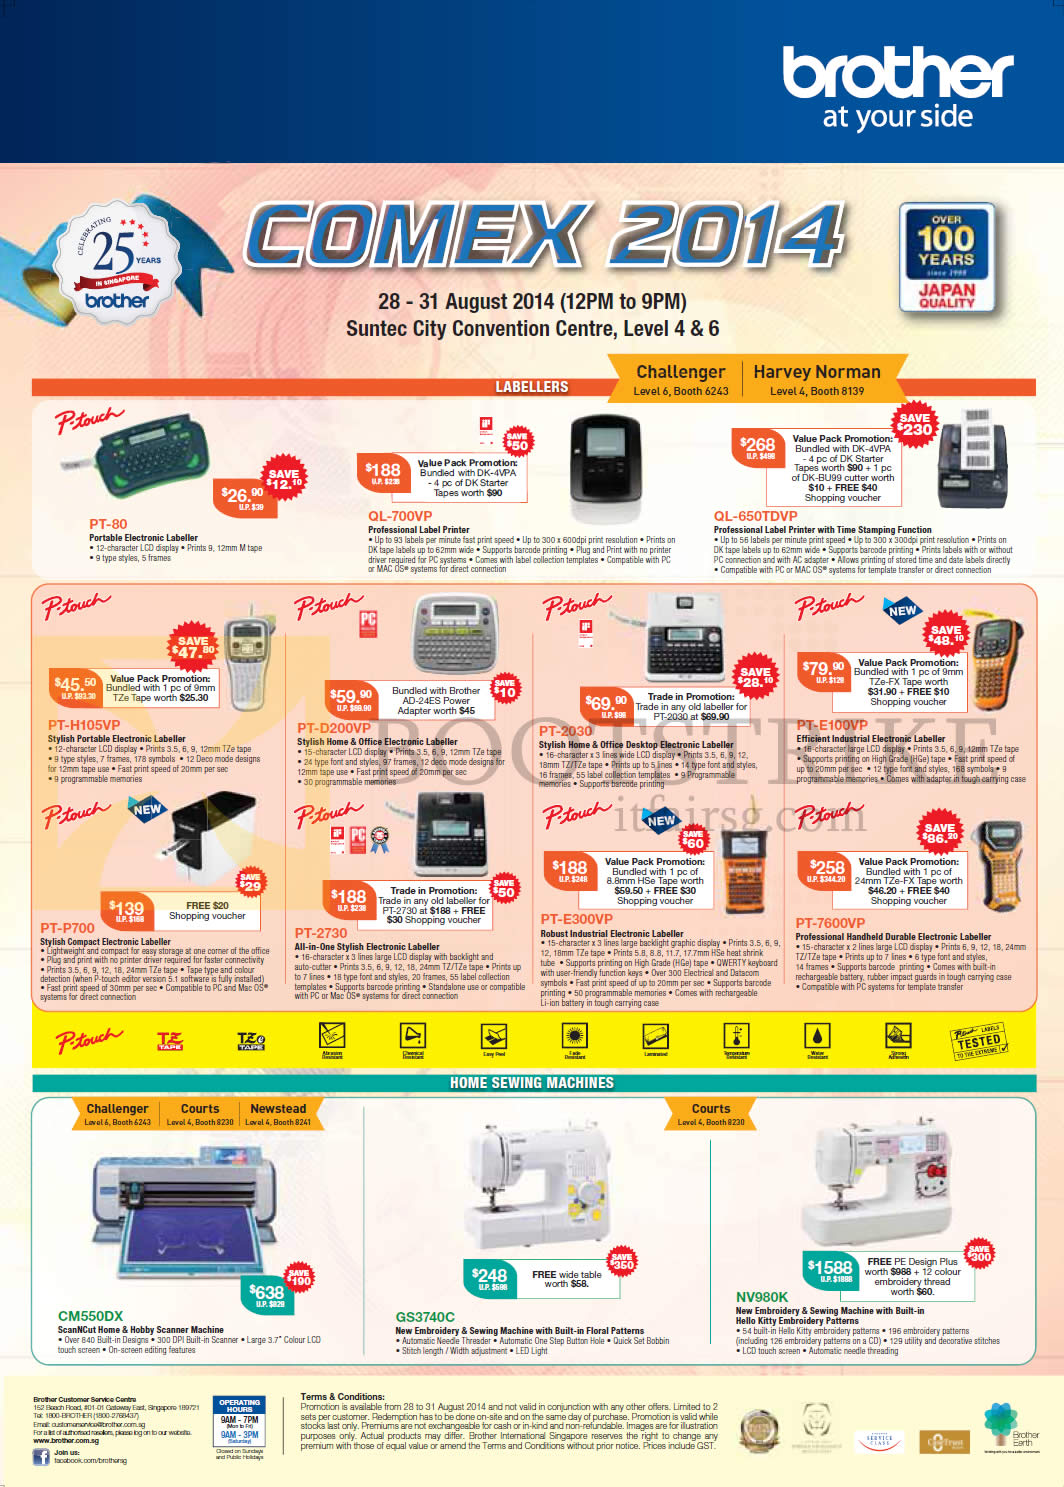 COMEX 2014 price list image brochure of Brother Labellers P-Touch, Sewing Machines, QL-700VP, 650TDVP, PT-80, H105VP, D200VP, 2030, E100VP, P700, 2730, E300VP, 7600VP, CM550DX, GS3740C, NV980K